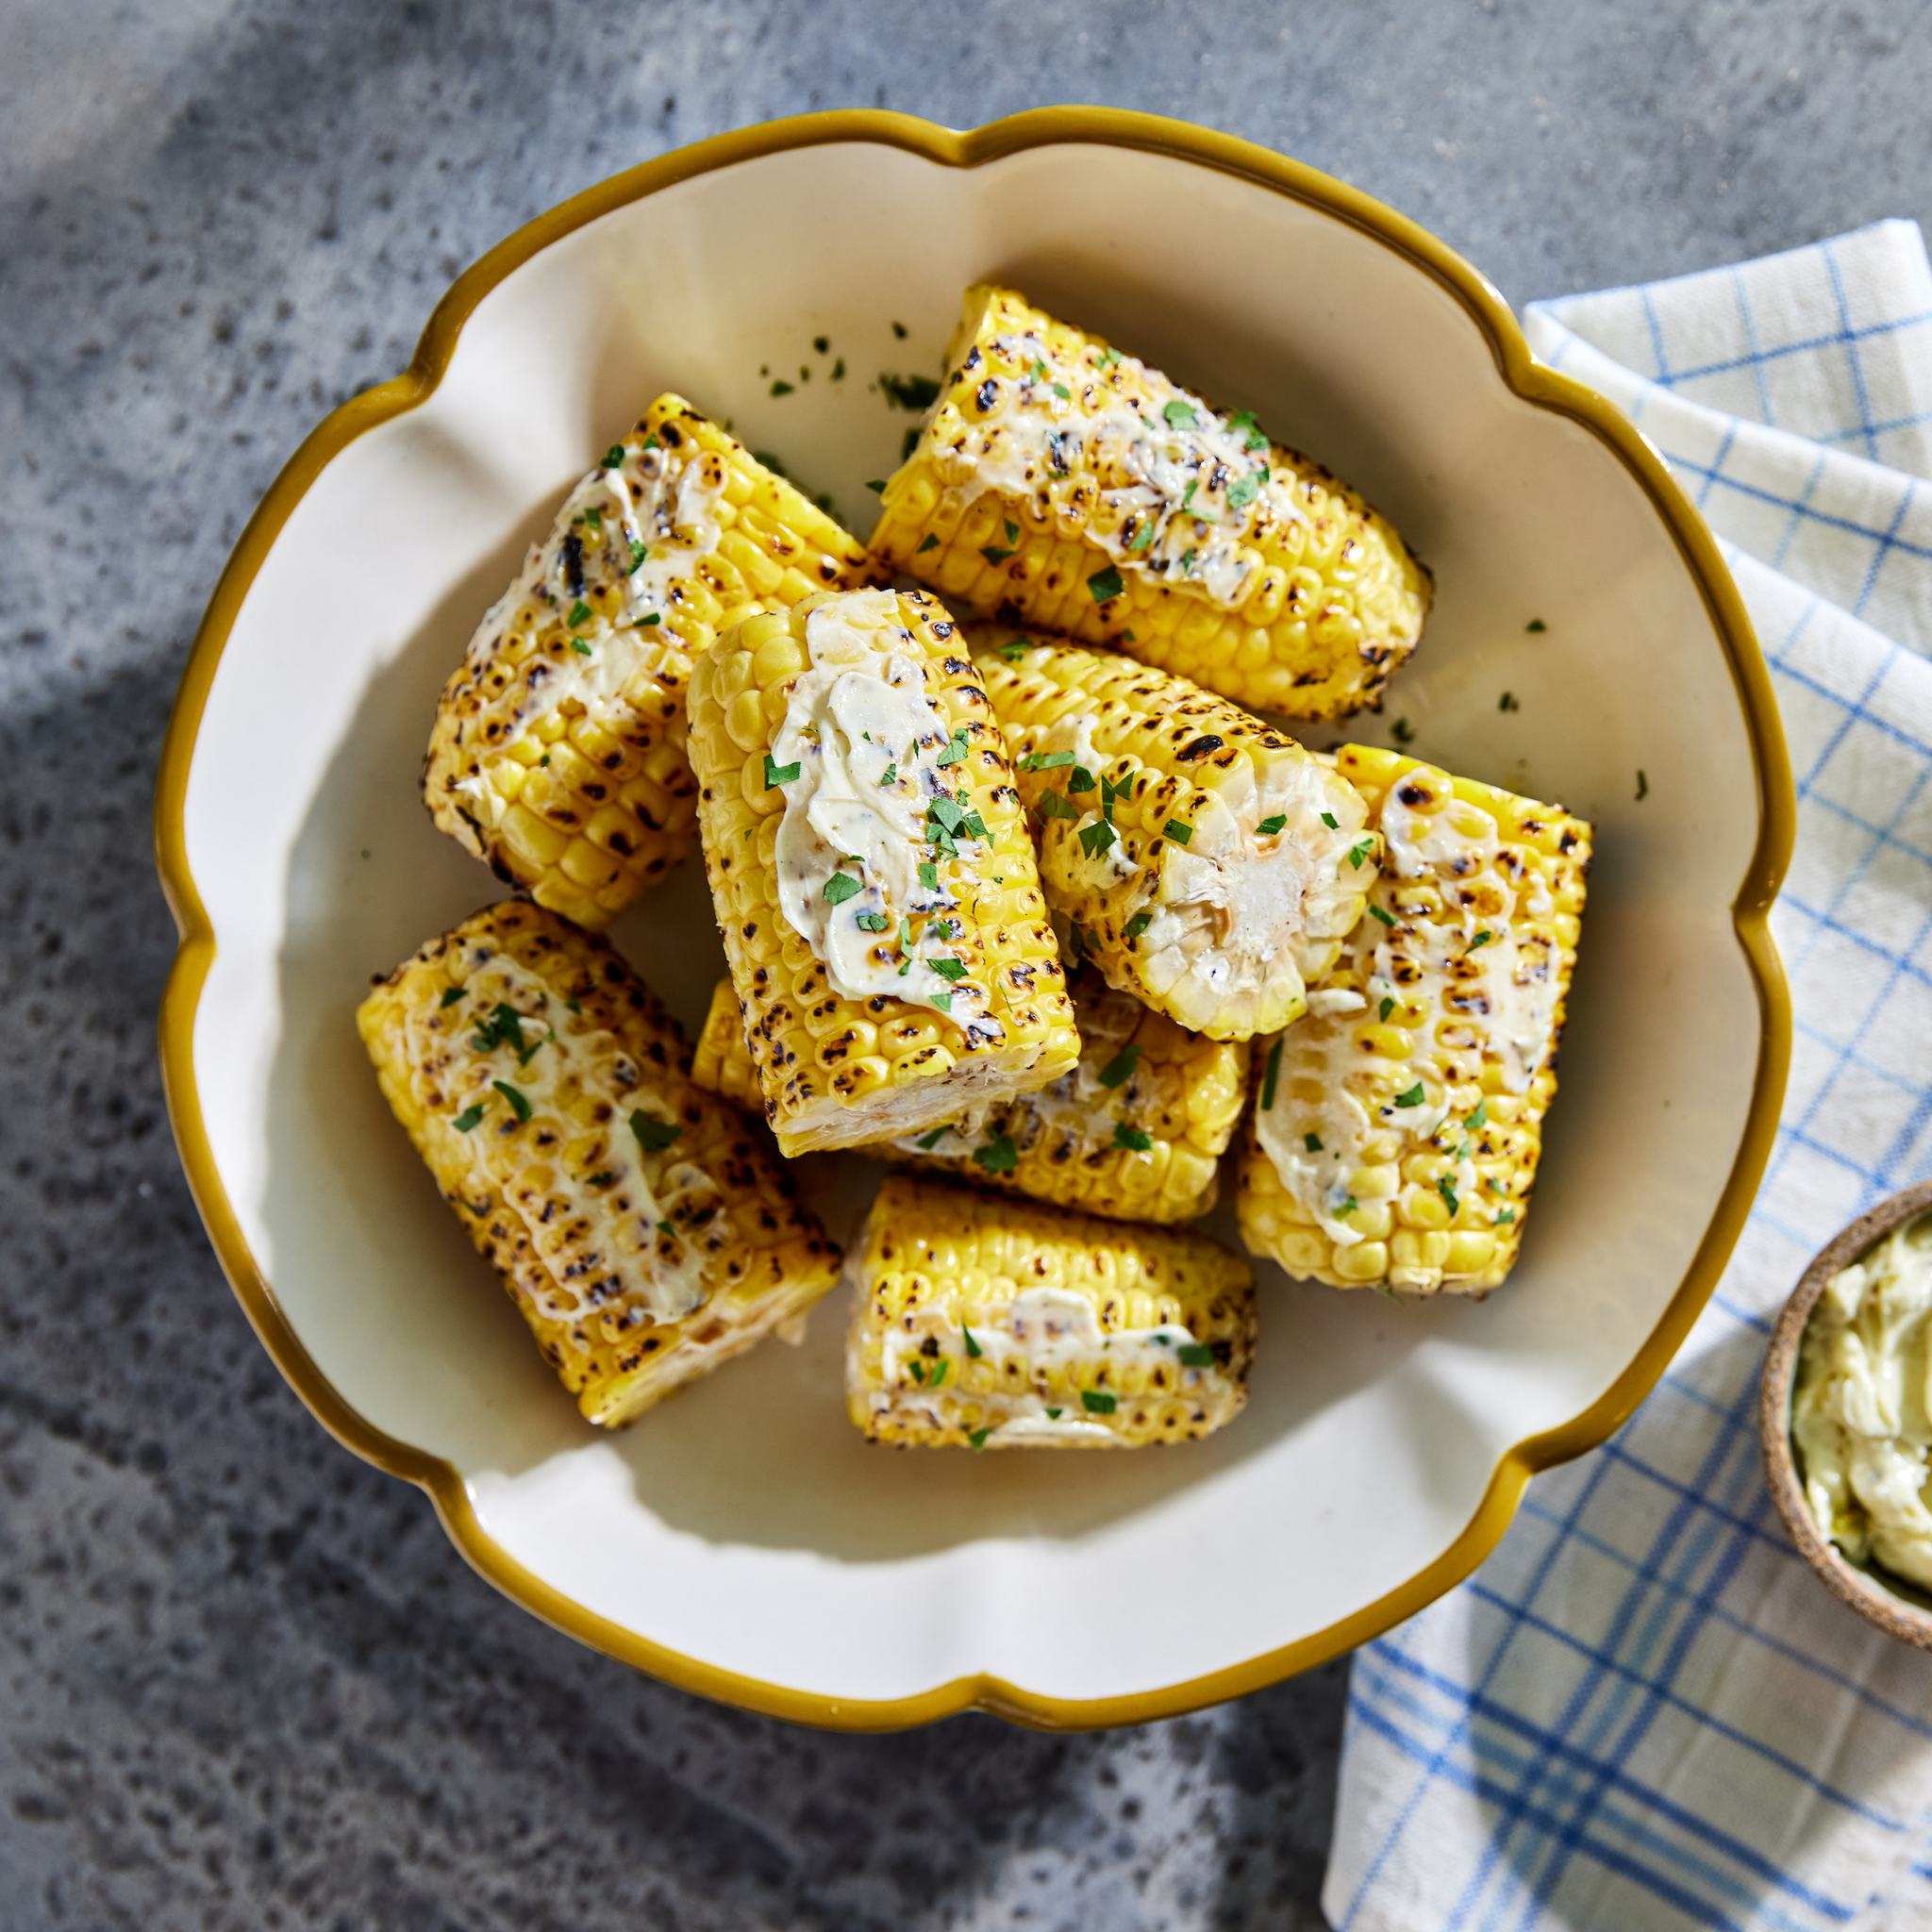 Corn on the cob is topped with butter in a white bowl with a yellow rim.